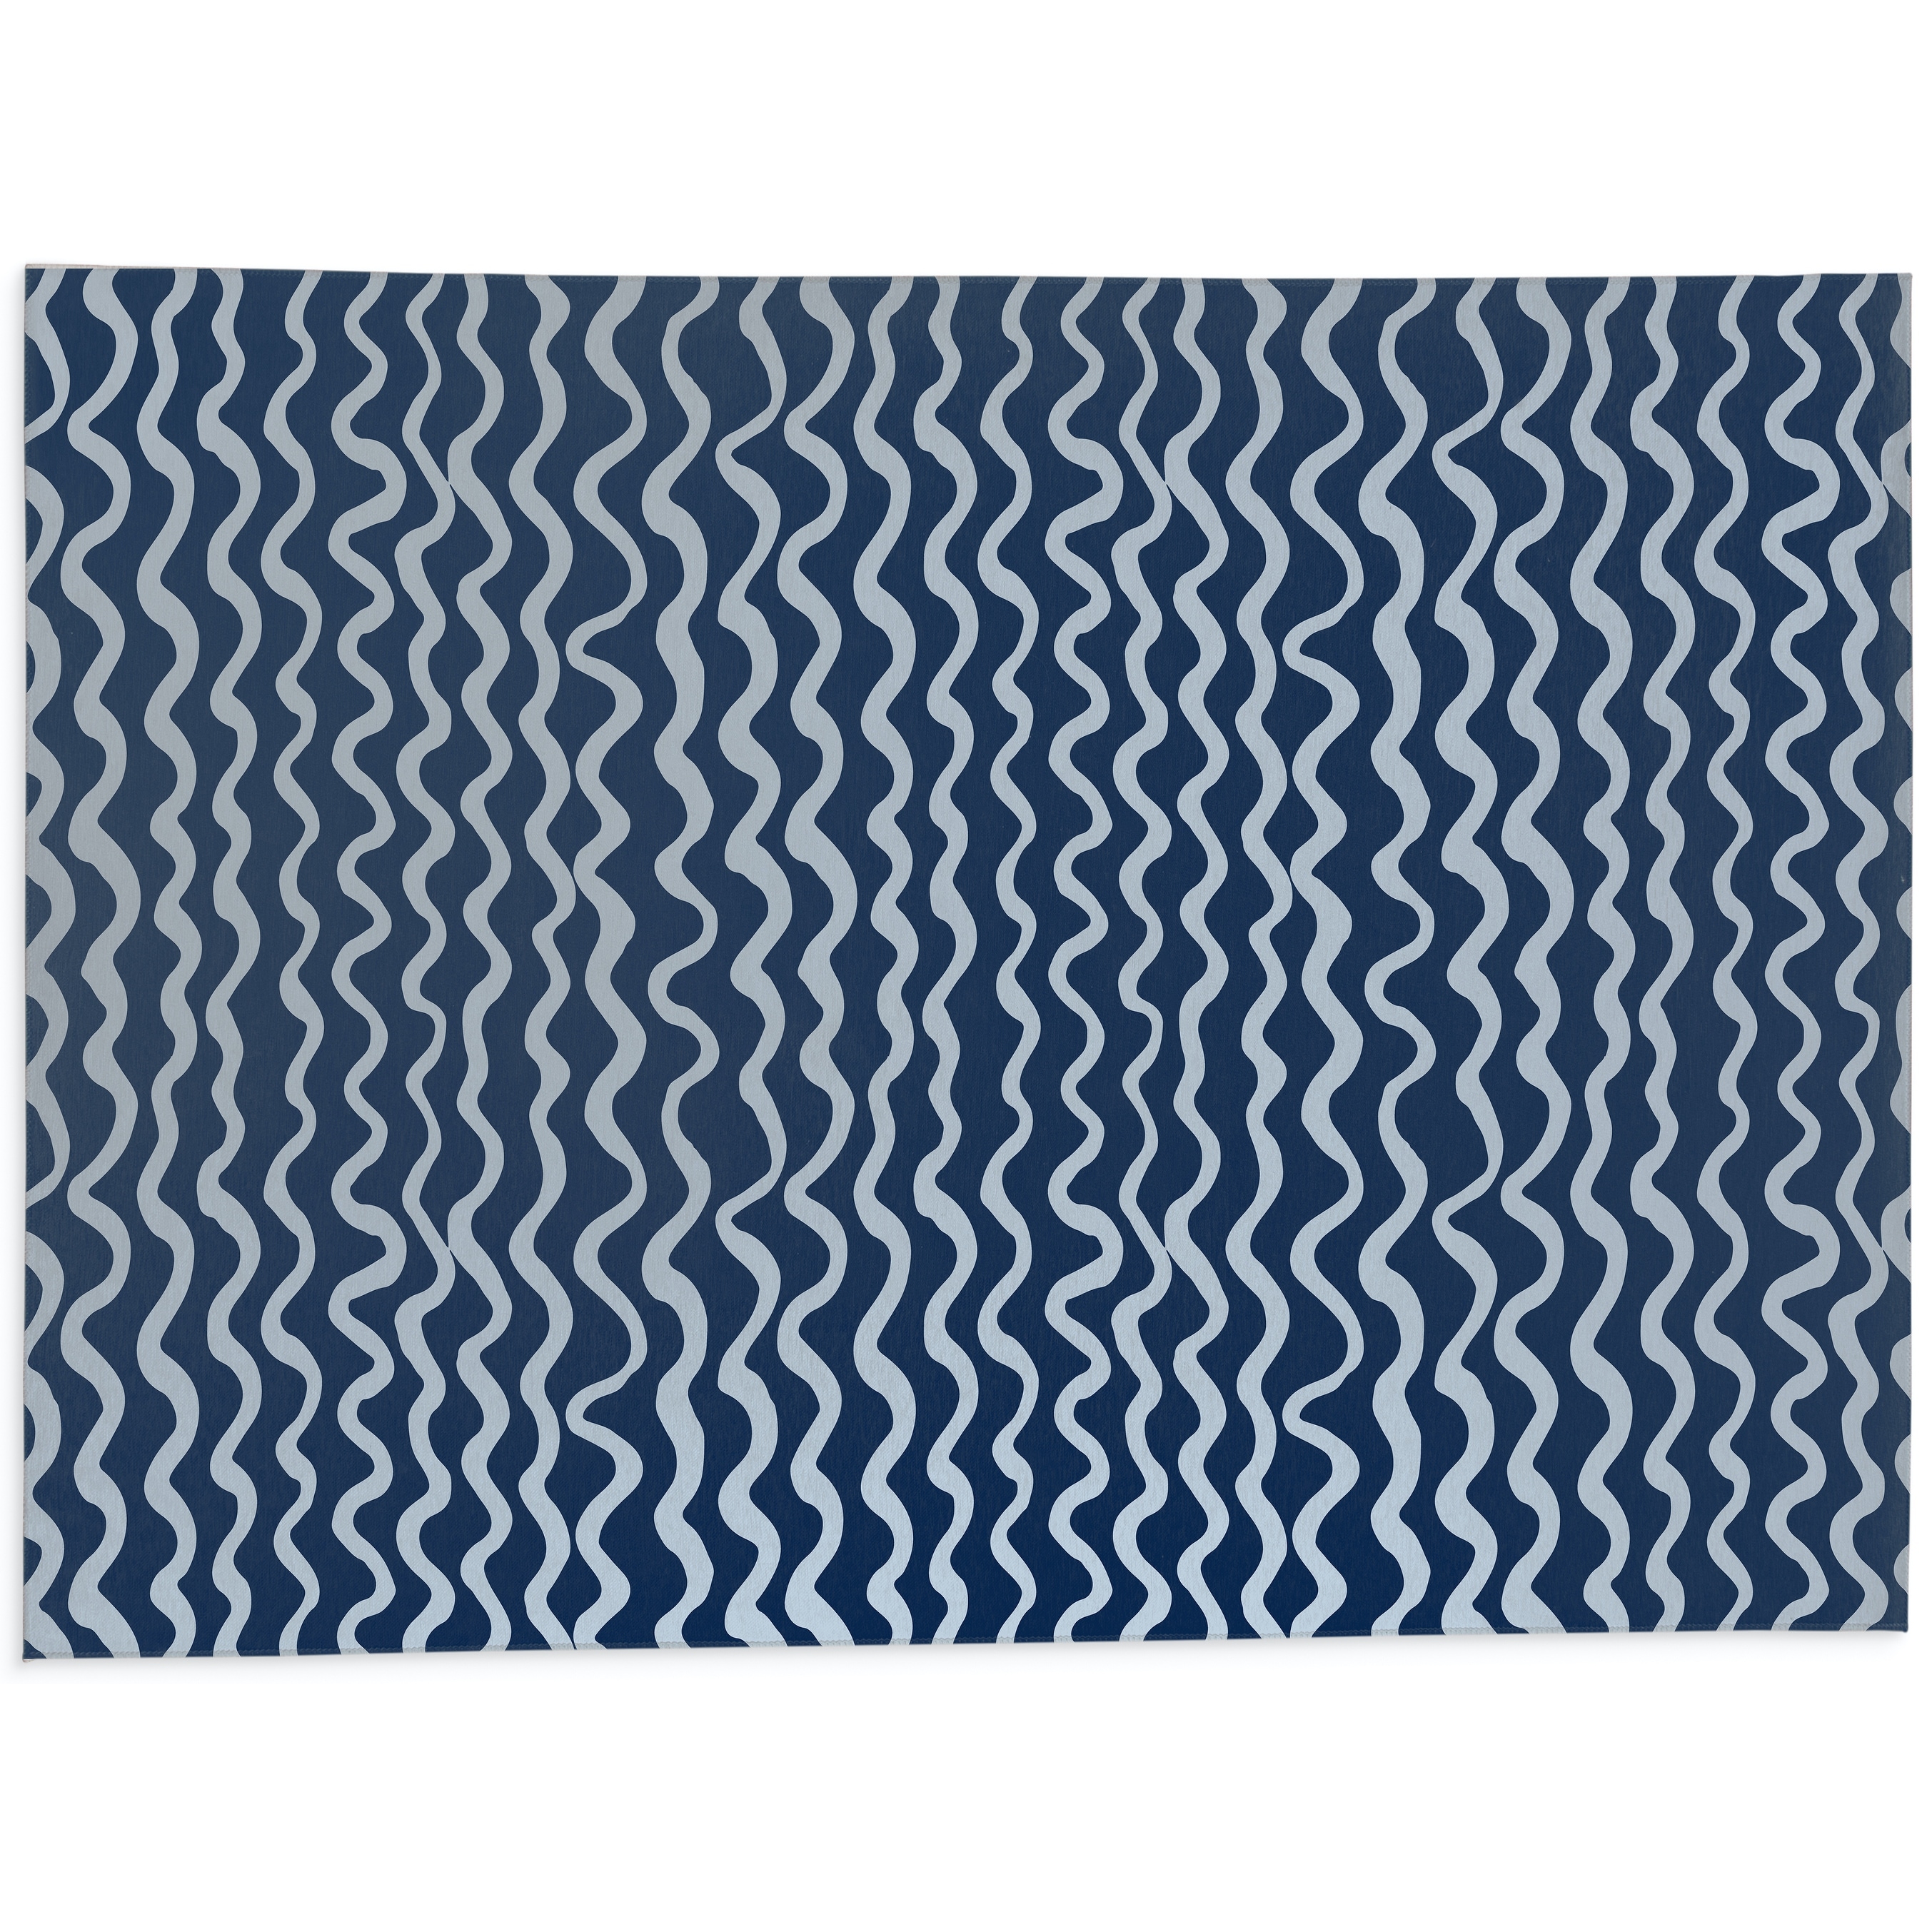 https://ak1.ostkcdn.com/images/products/is/images/direct/6d5cff1acd8ebc59eb2594082fa0cd7266b6bceb/WAVES-ABSTRACT-NAVY-Indoor-Door-Mat-By-Kavka-Designs.jpg